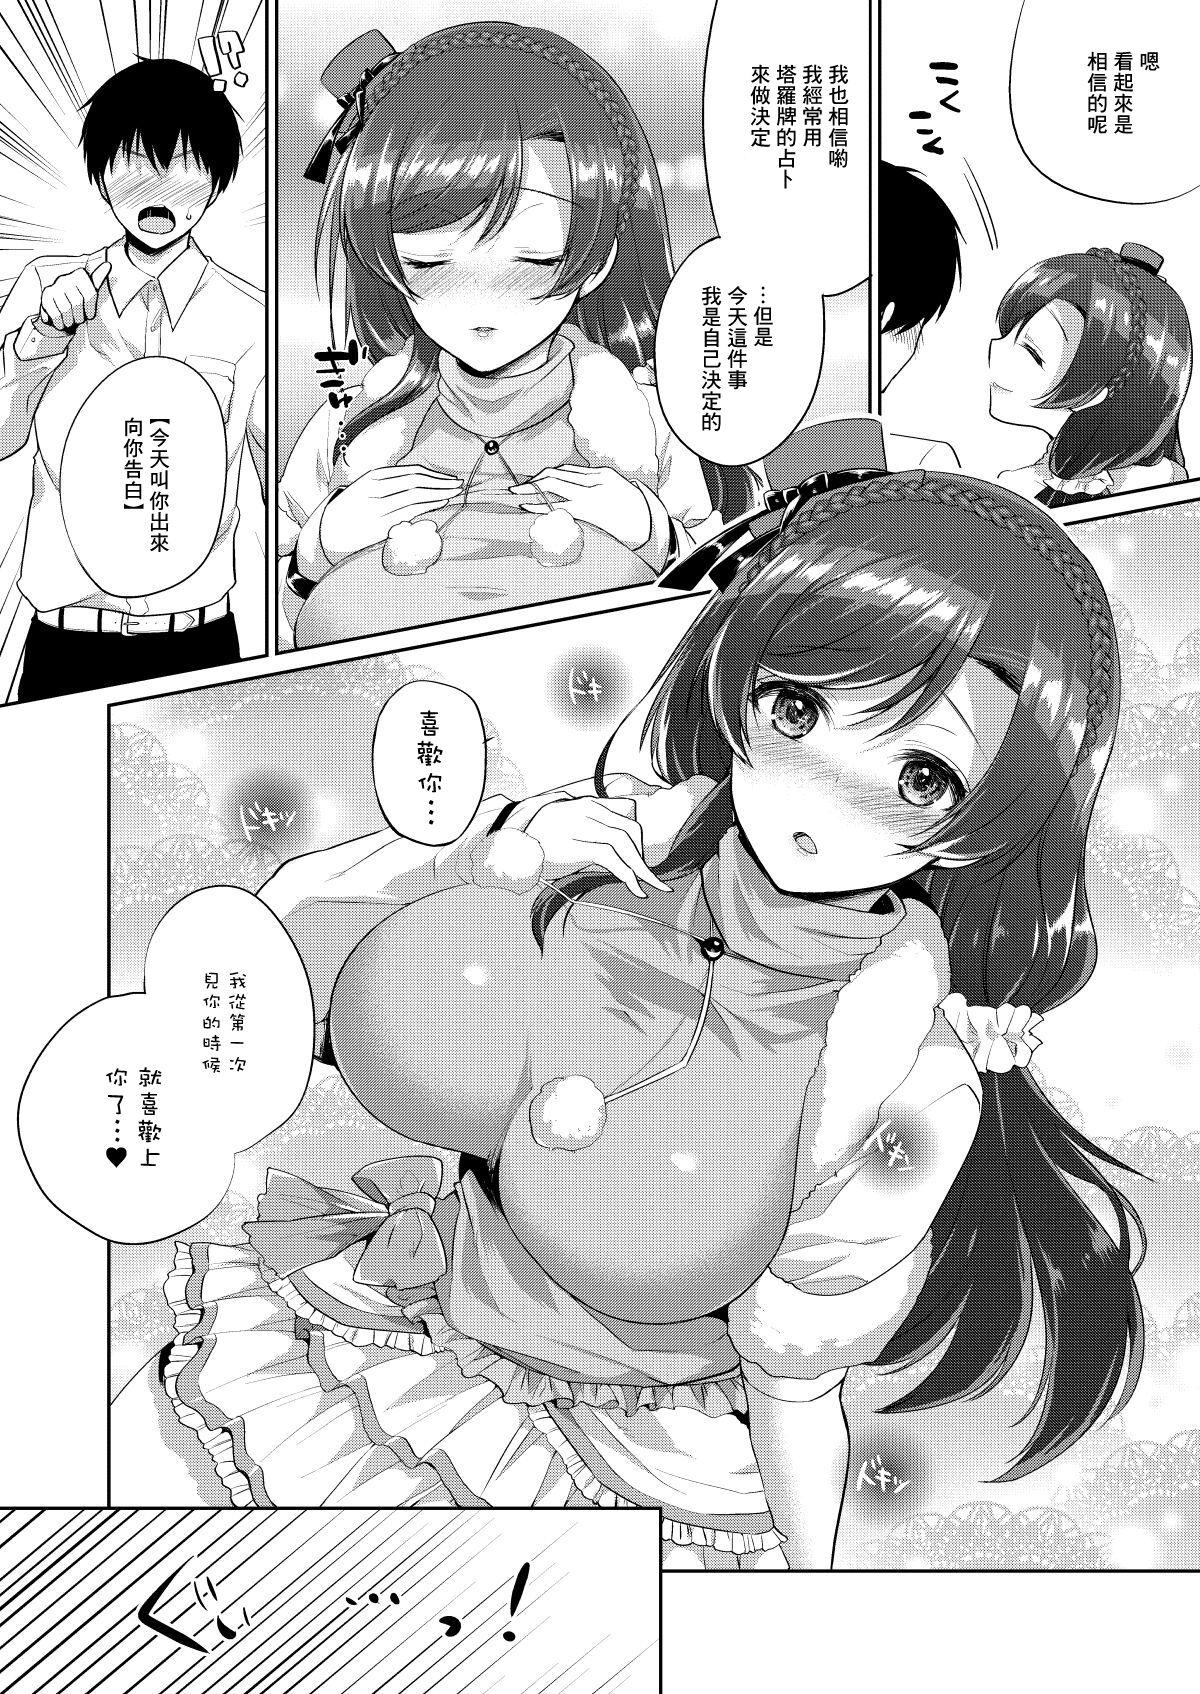 Bucetinha 希といちゃラブエッチ - Love live Wet Cunts - Page 2